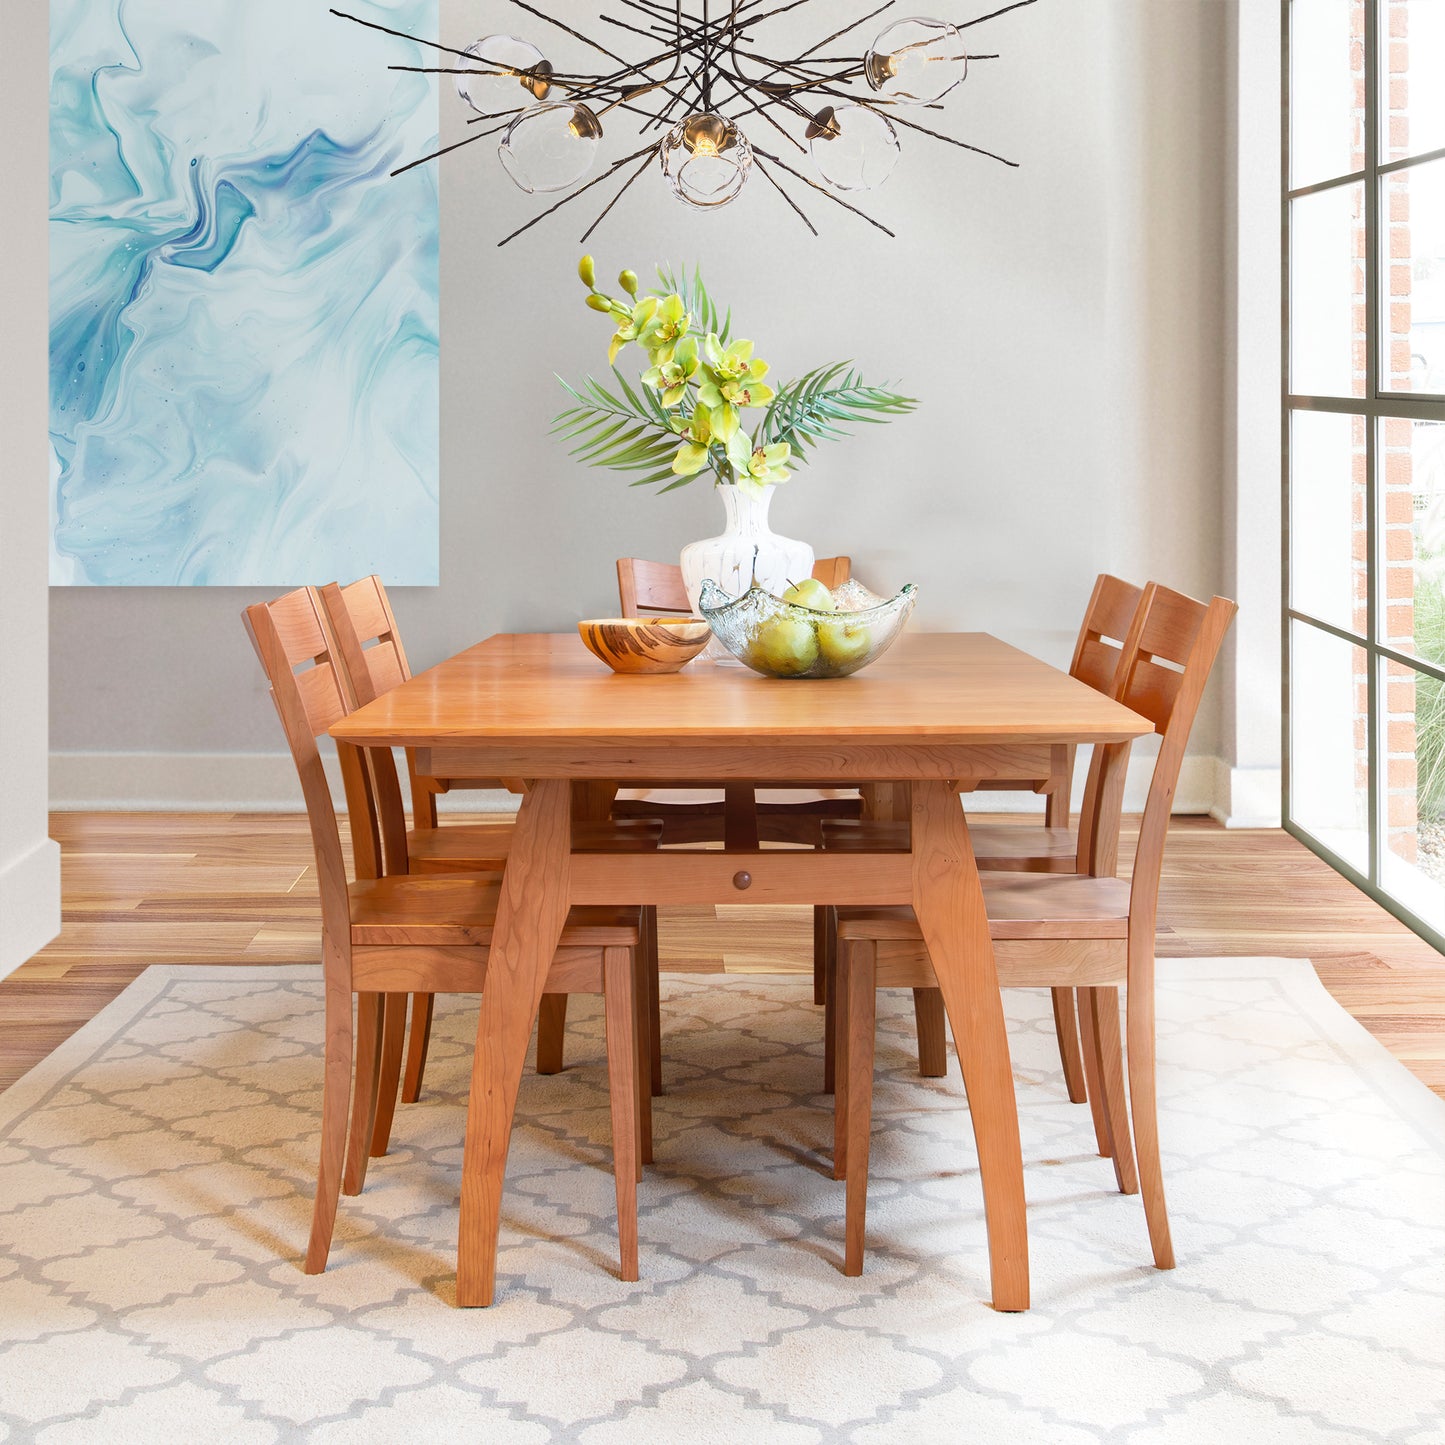 A high-end dining room with a Lyndon Furniture Vermont Modern Butterfly Extension Table and chairs.